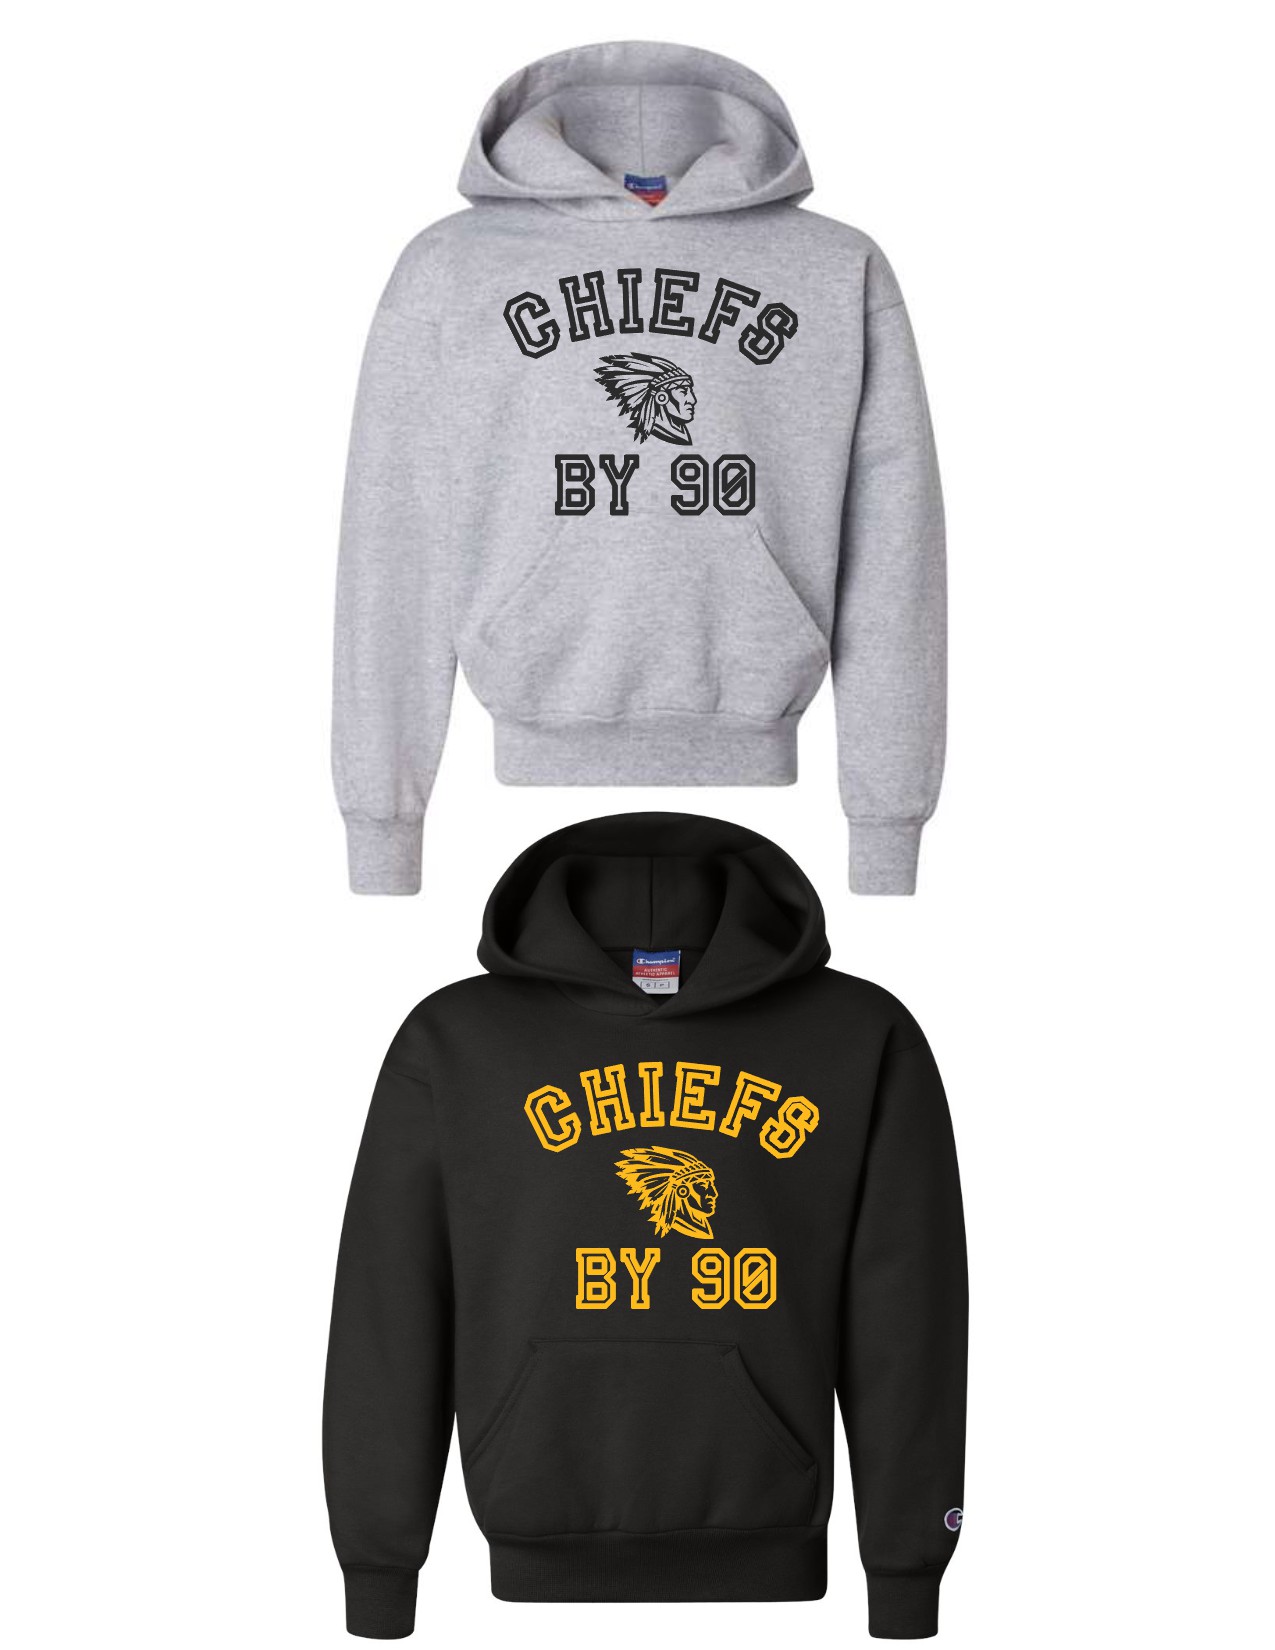 'Chiefs by 90' Champion Hoodie - YOUTH